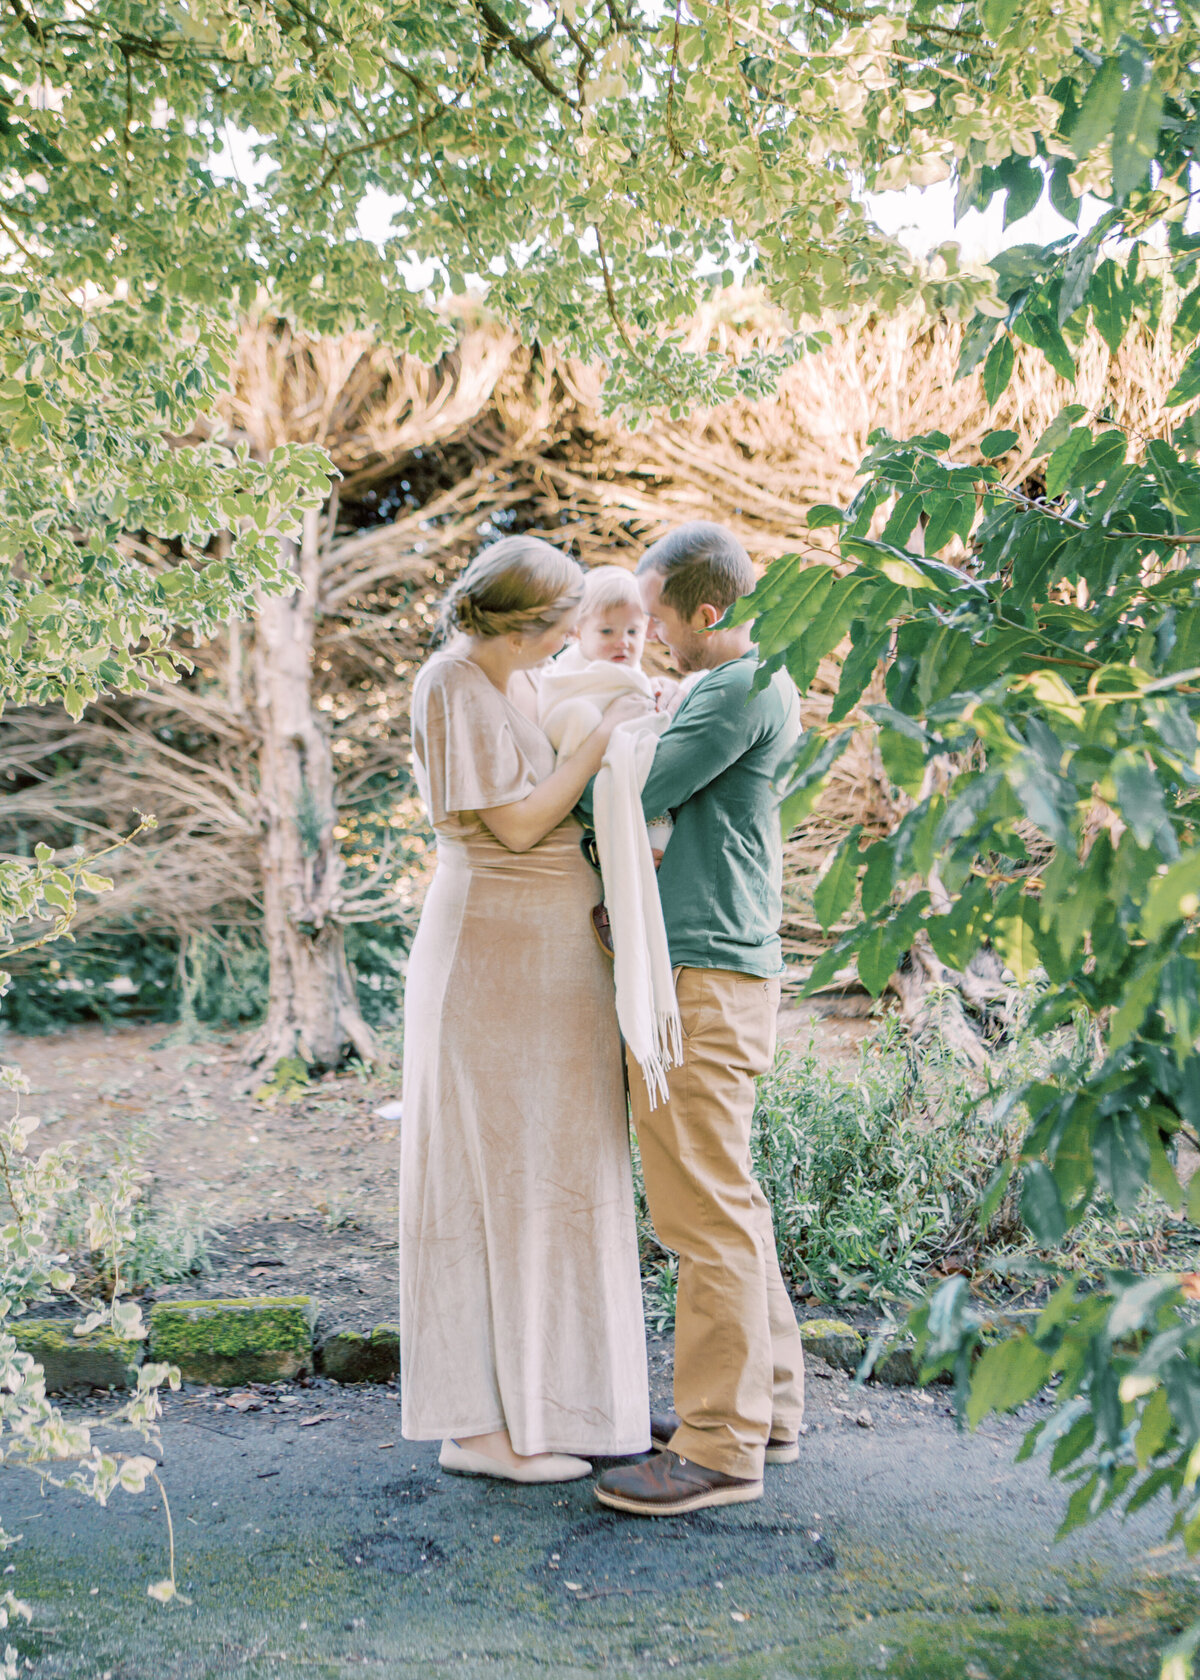 Intimate moment of parents snuggling their daughter in gardens by Oklahoma City Family Photographer Courtney Cronin